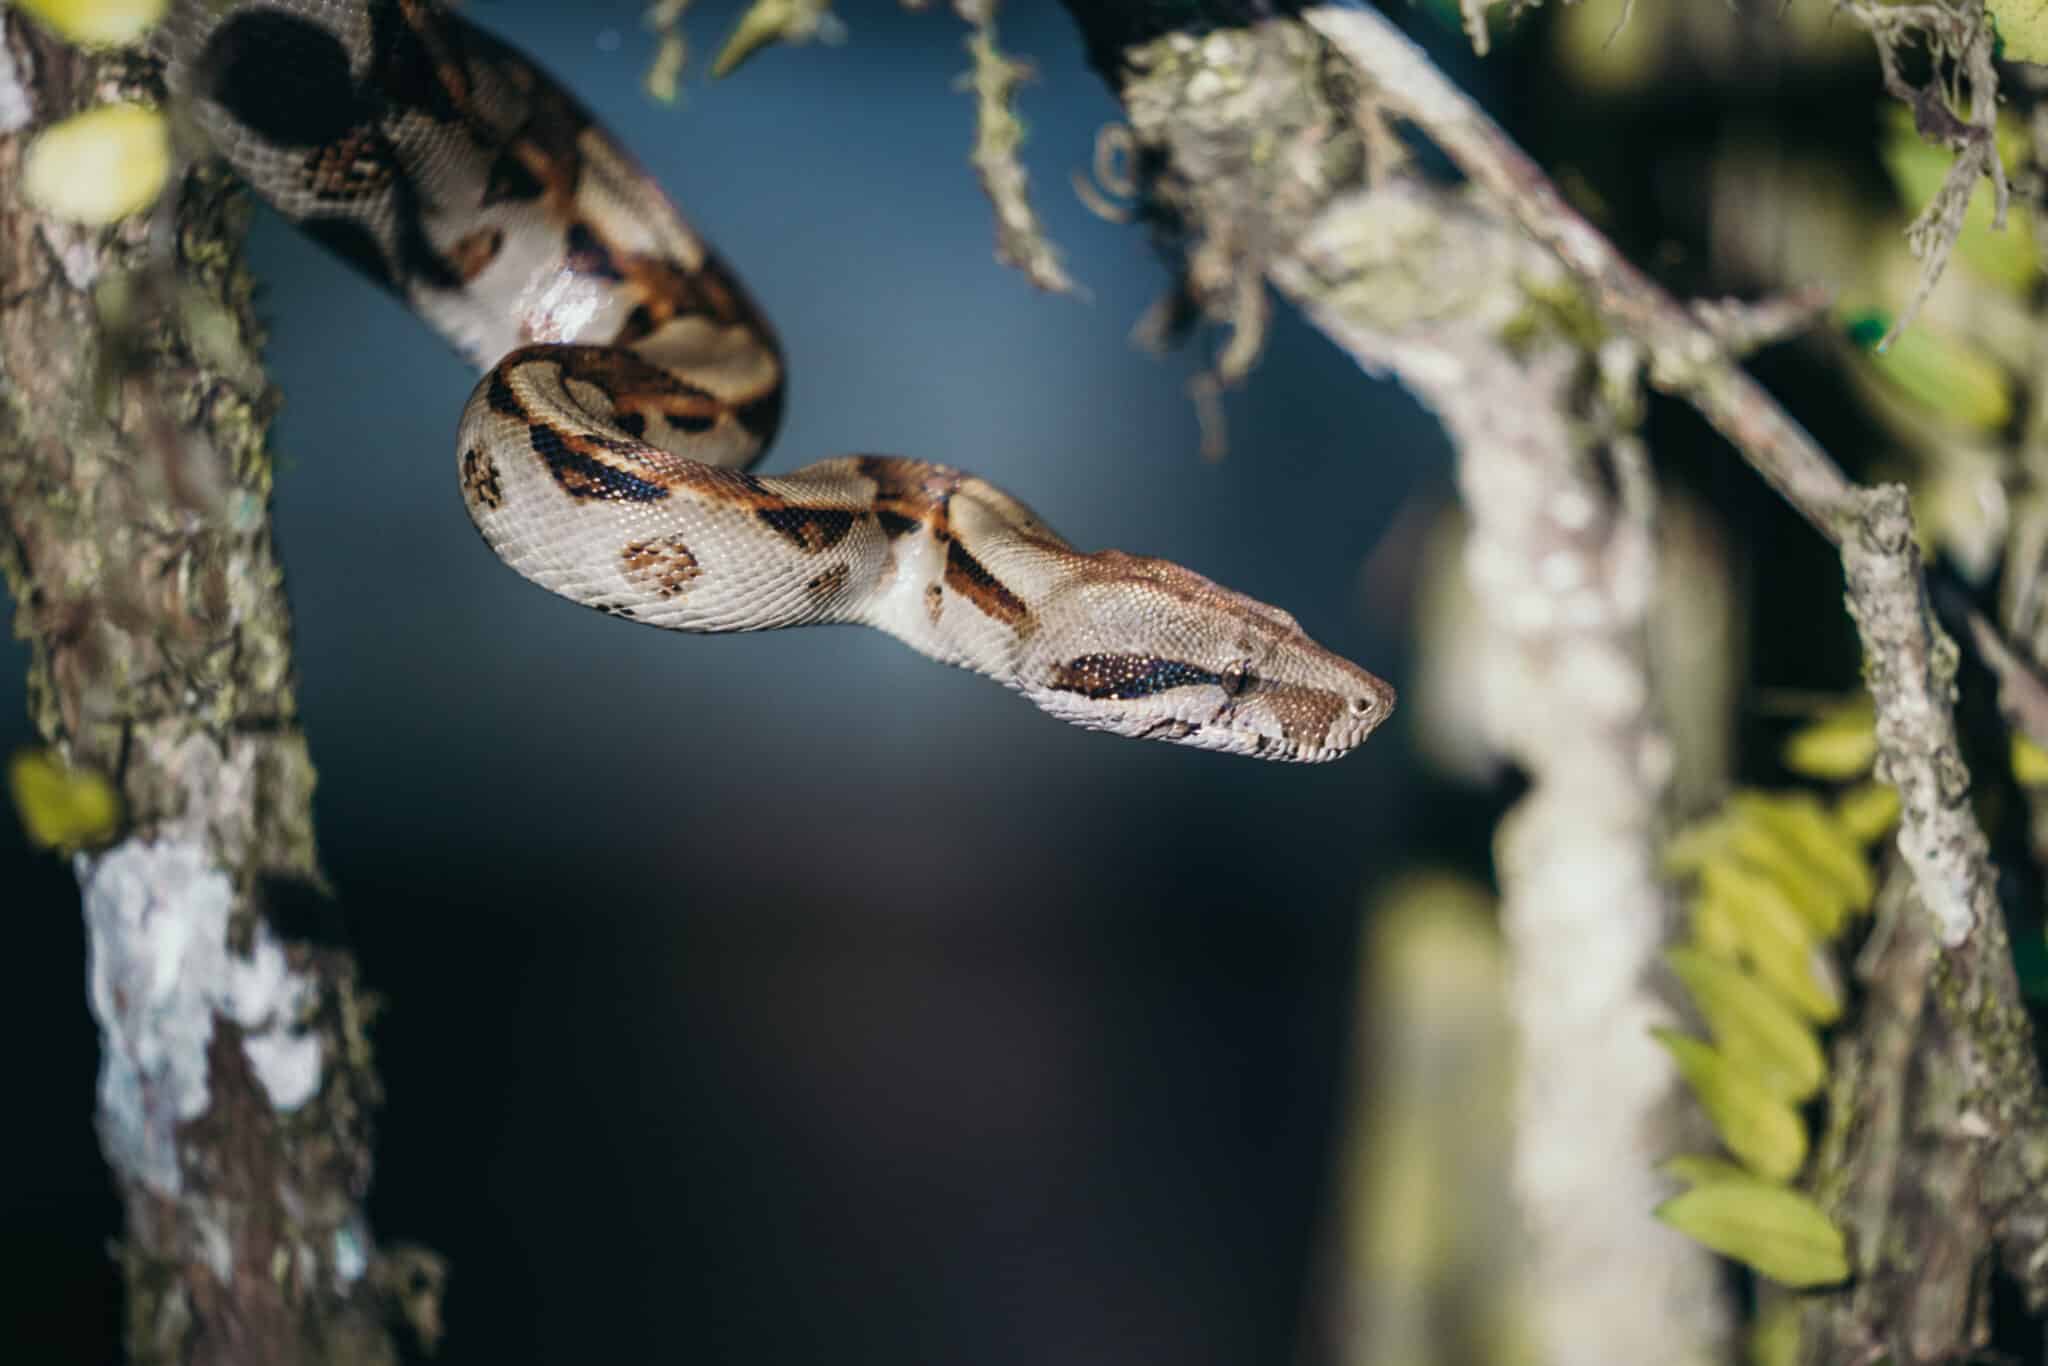 A python hanging from a tree branch in Tortuguero, Costa Rica.